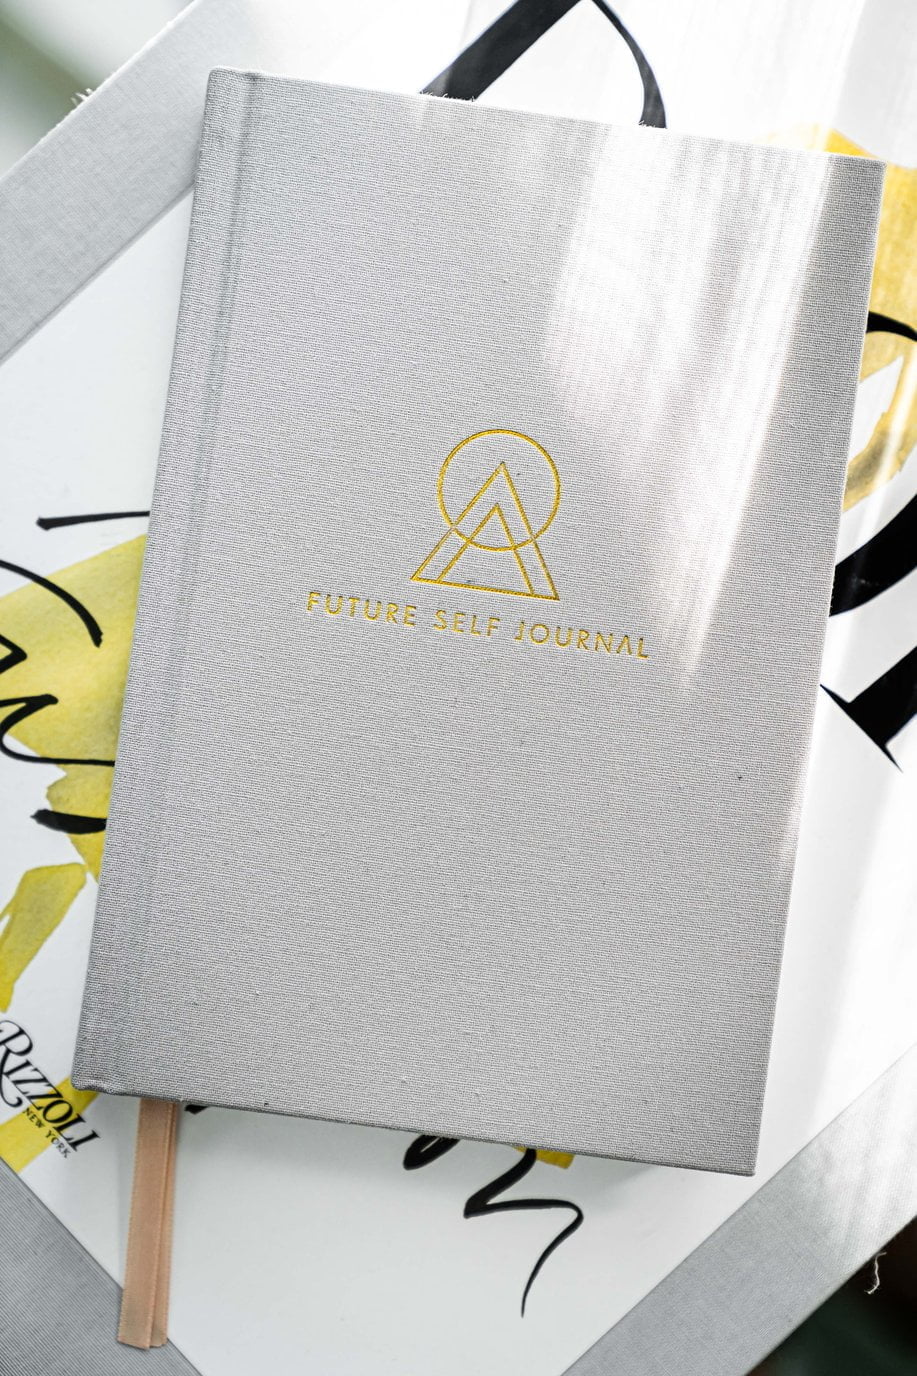 15% Off With Future Self Journal Coupon Code